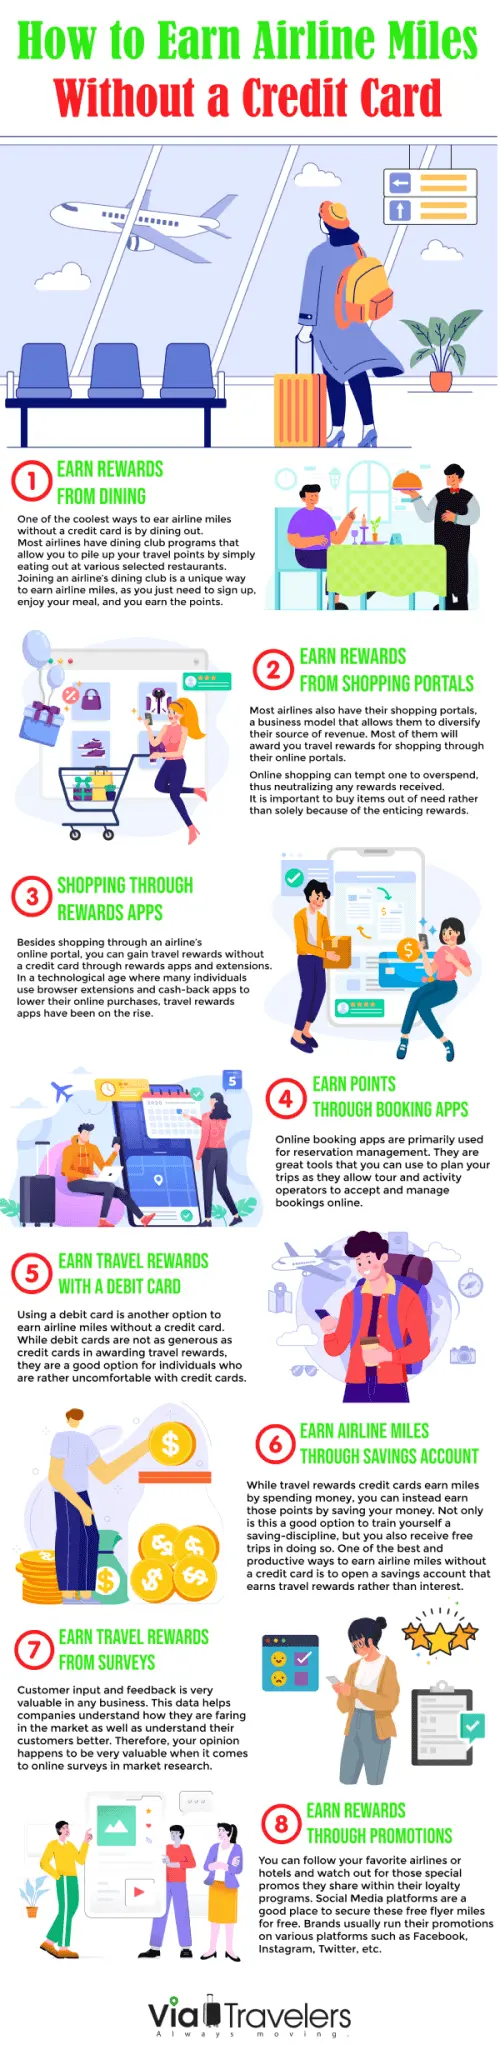 How to Earn Airline Miles Infographic